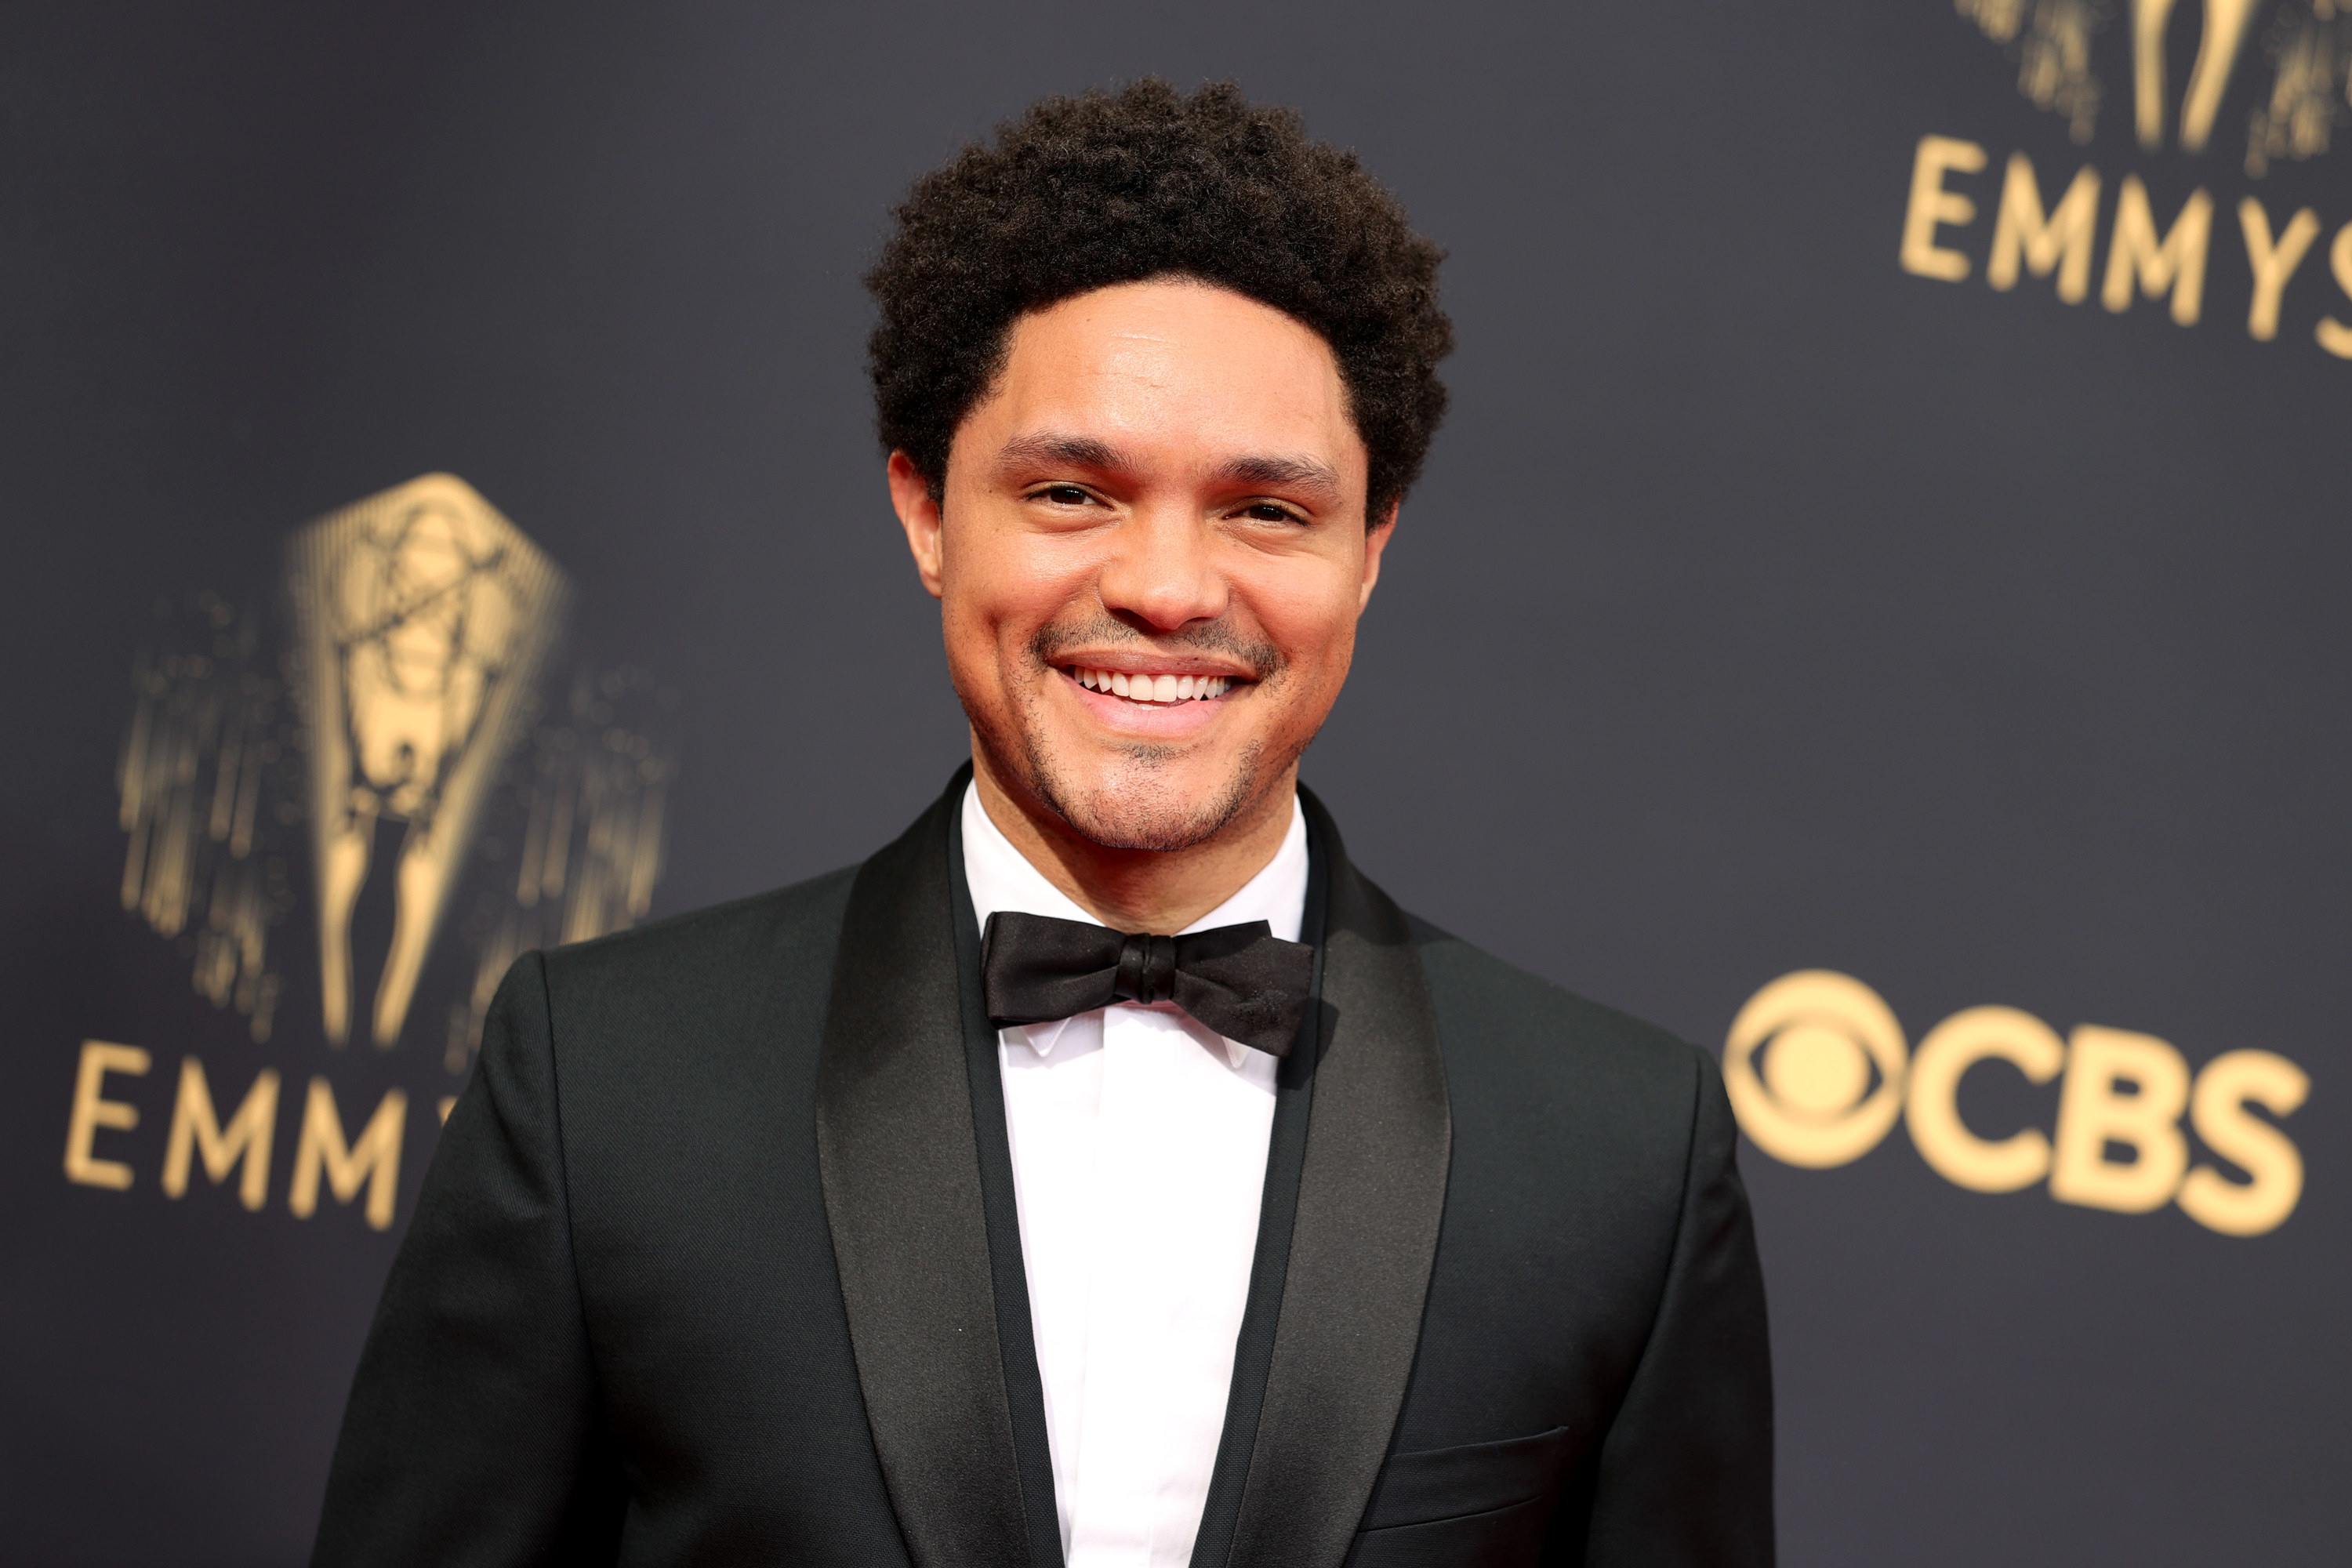 A close-up of Trevor Noah smiling in a bow tie and suit at the Emmy Awards red carpet